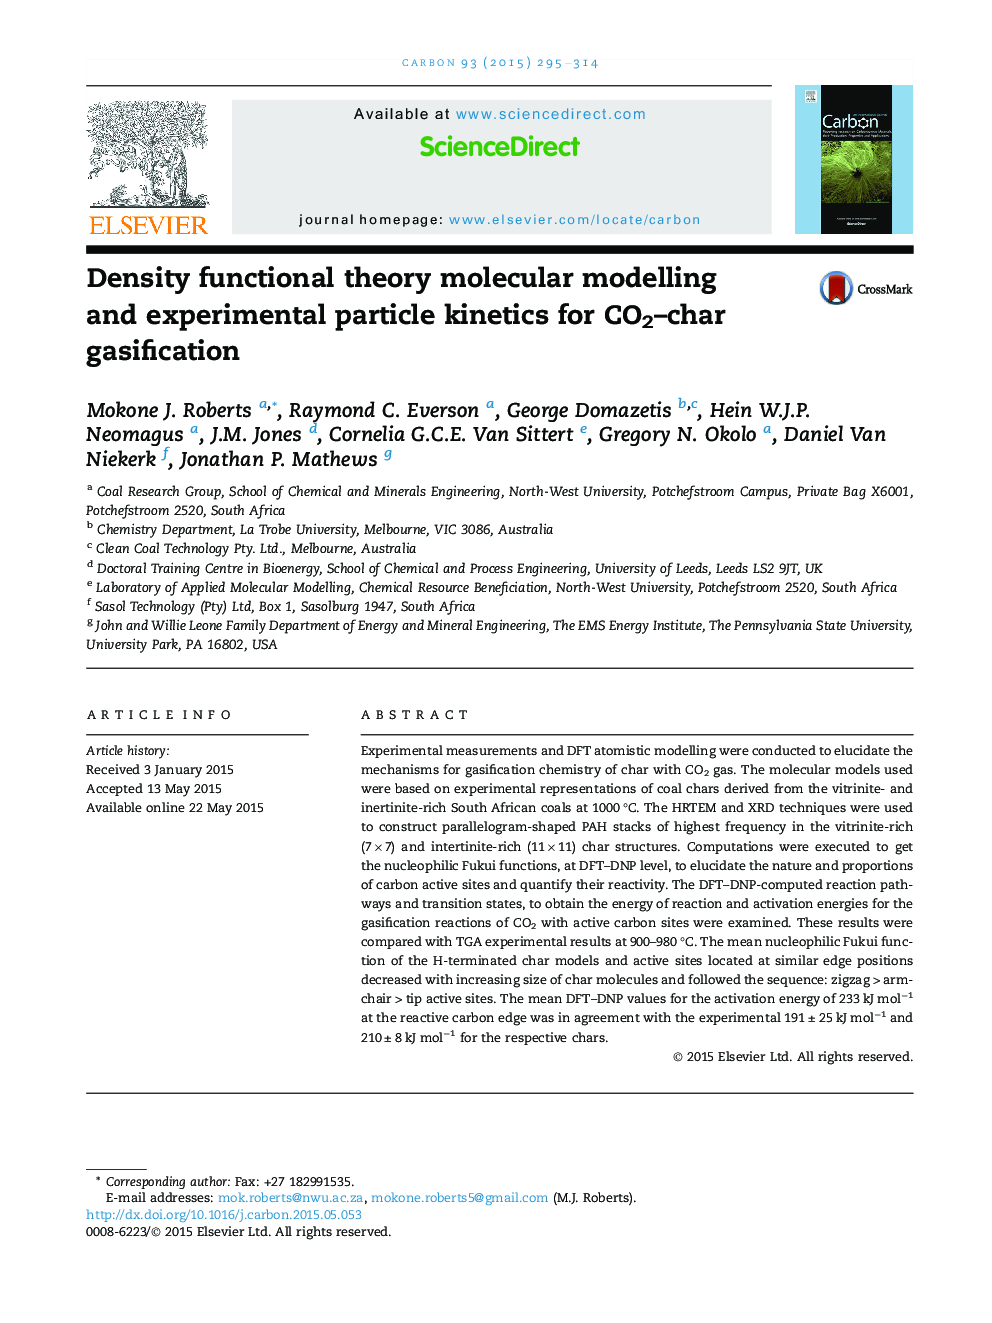 Density functional theory molecular modelling and experimental particle kinetics for CO2-char gasification